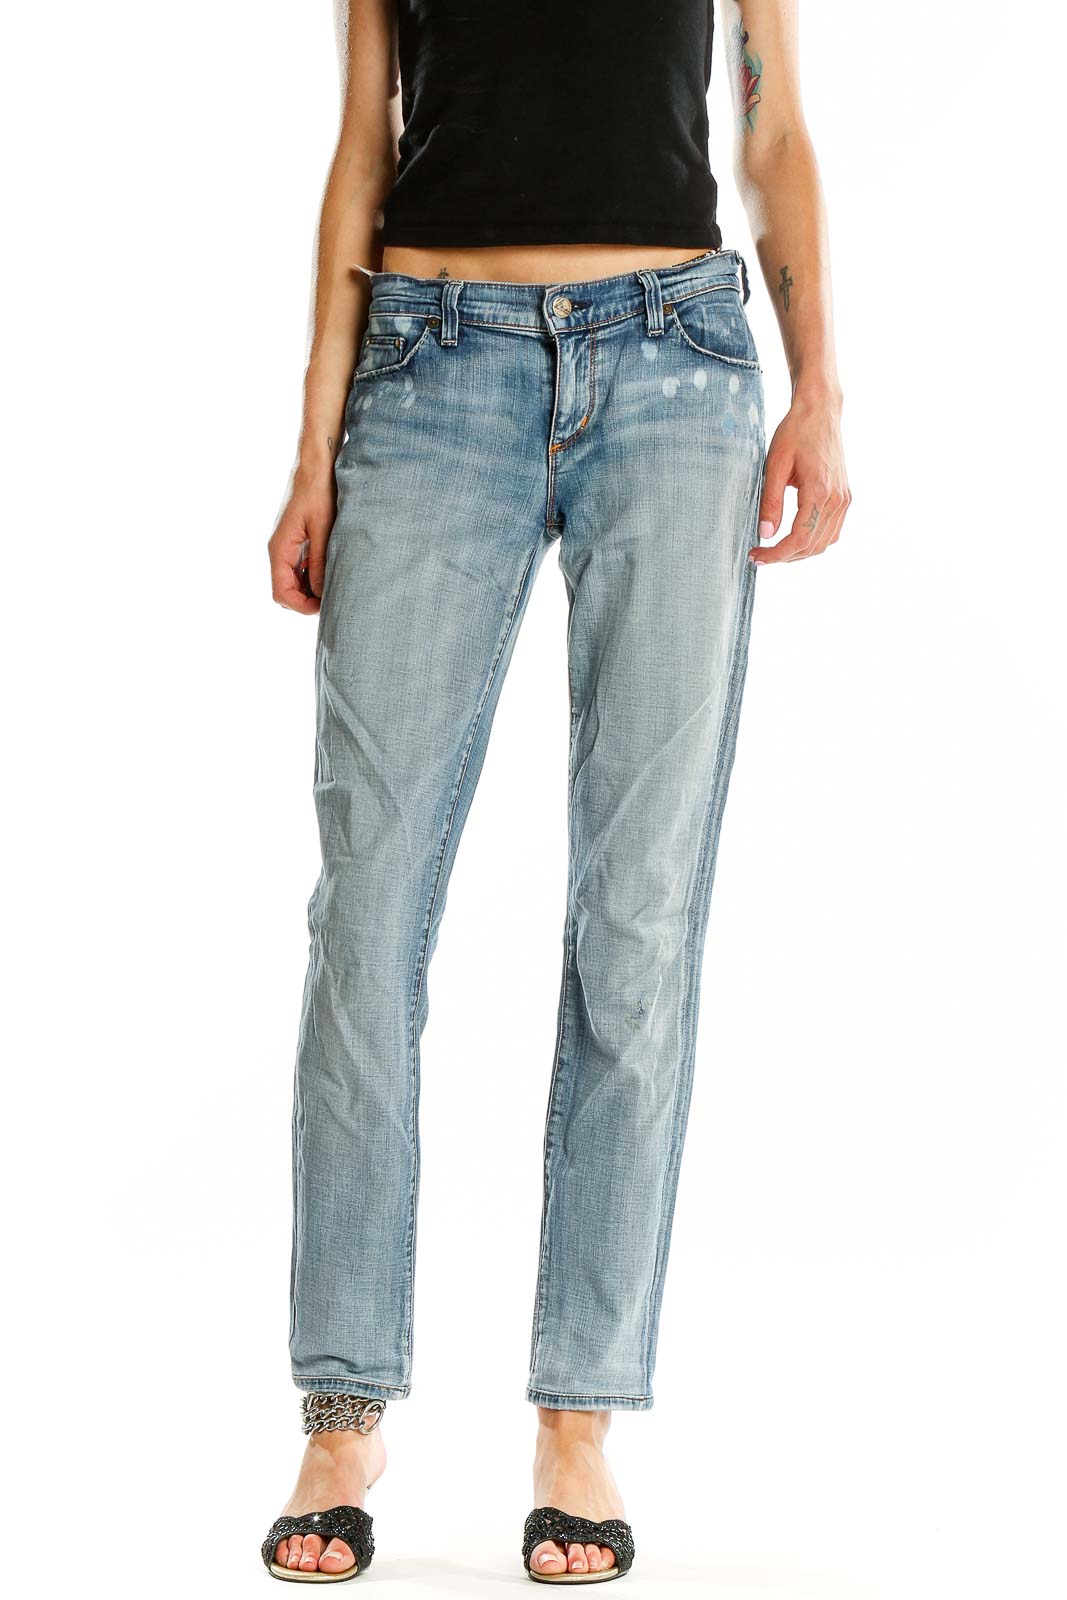 Grey Two-Toned Ankle Length Jeans Front